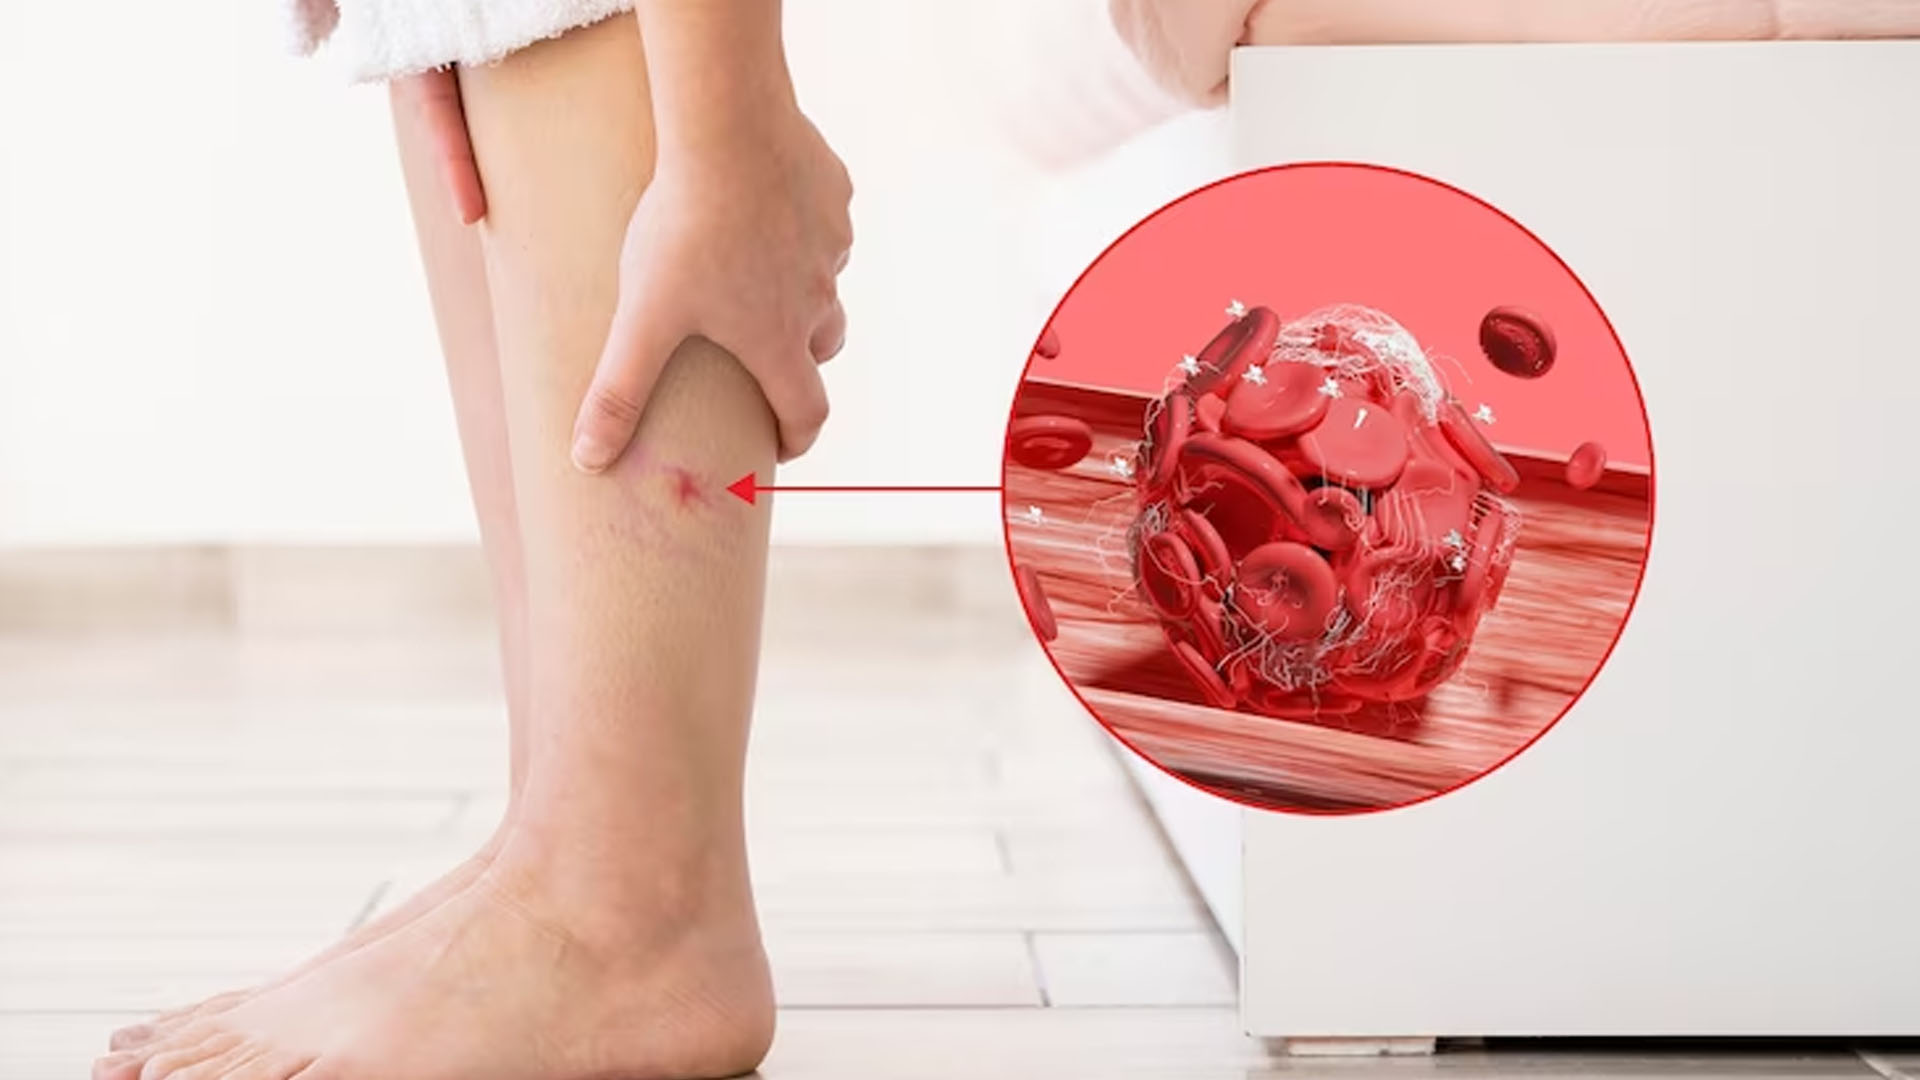 What are the Home Remedies to treat Varicose Veins?